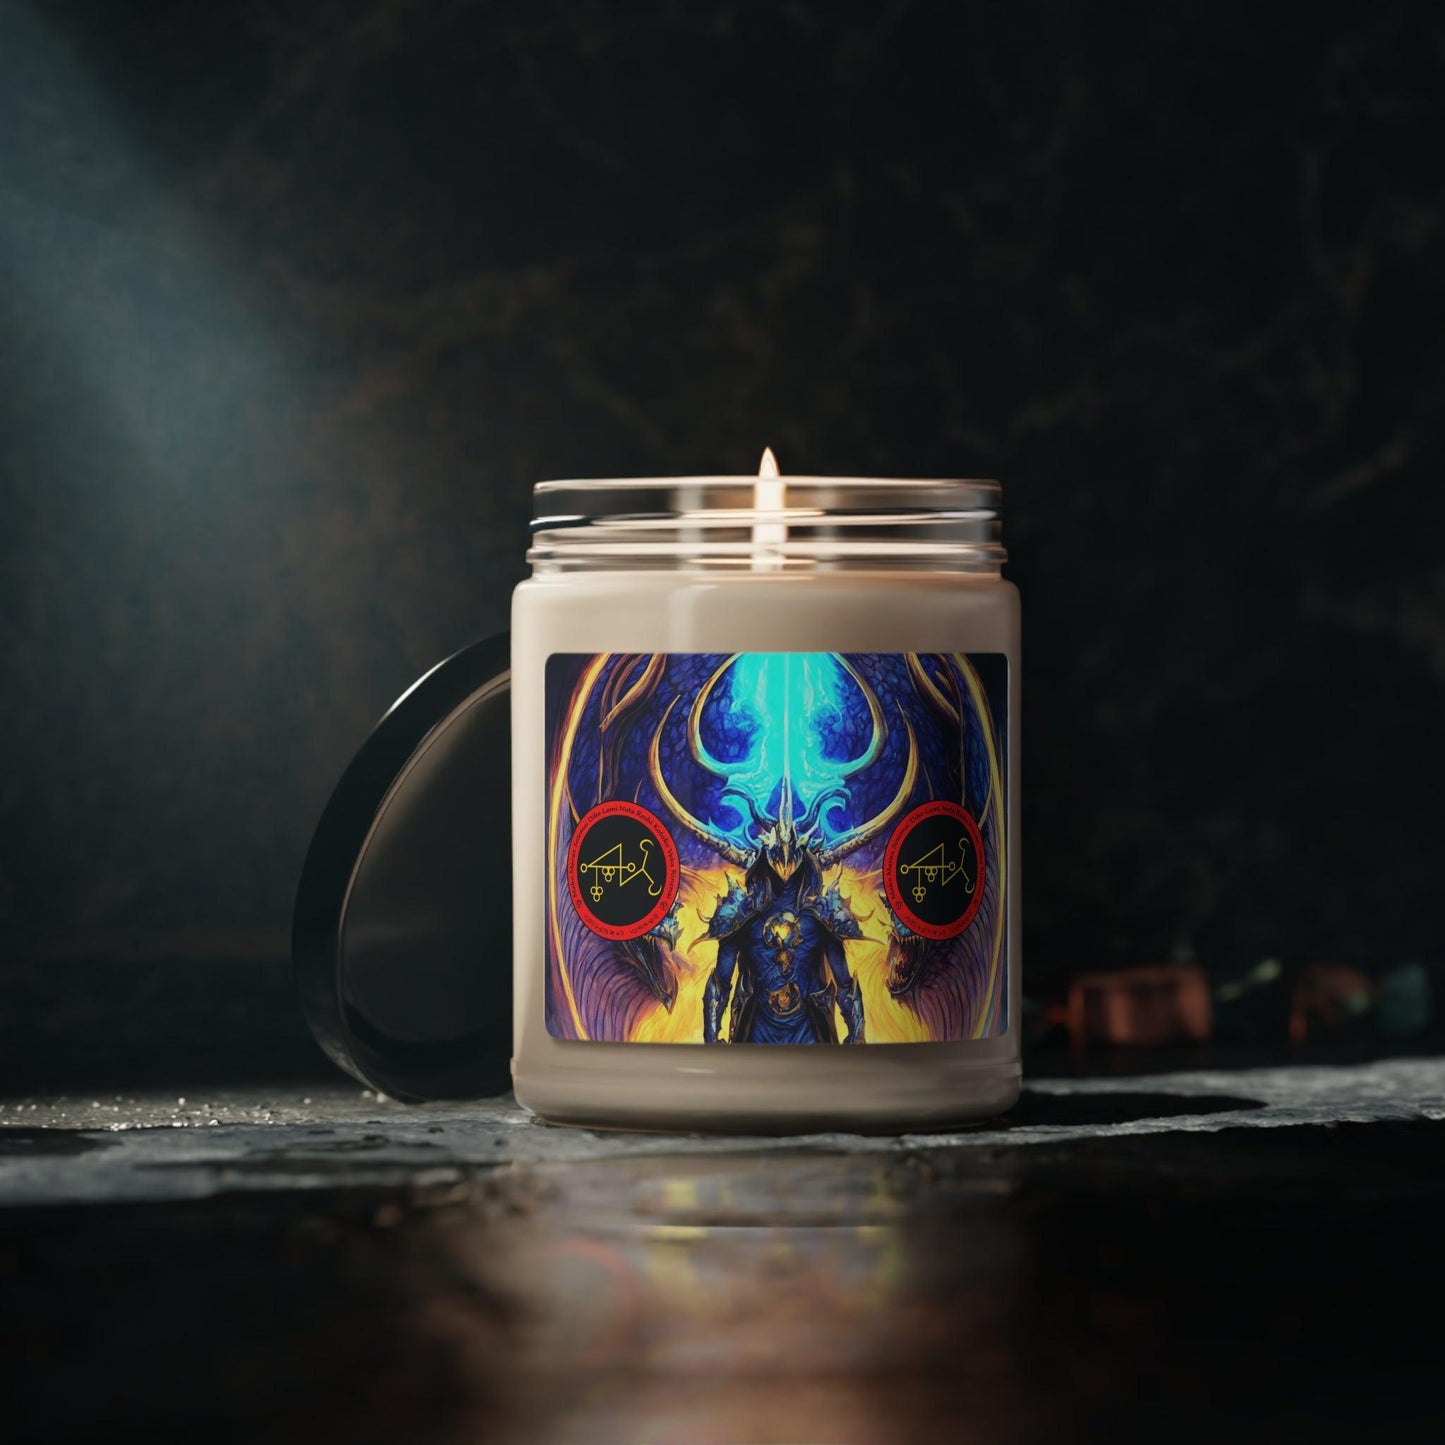 Demon-Marax-Altar-Scented-Soyed-Candle-To-Learn-Magic-and-witchcraft-in-προσφορές-τελετουργίες-μύηση-ή-προσευχή-και-διαλογισμός-5